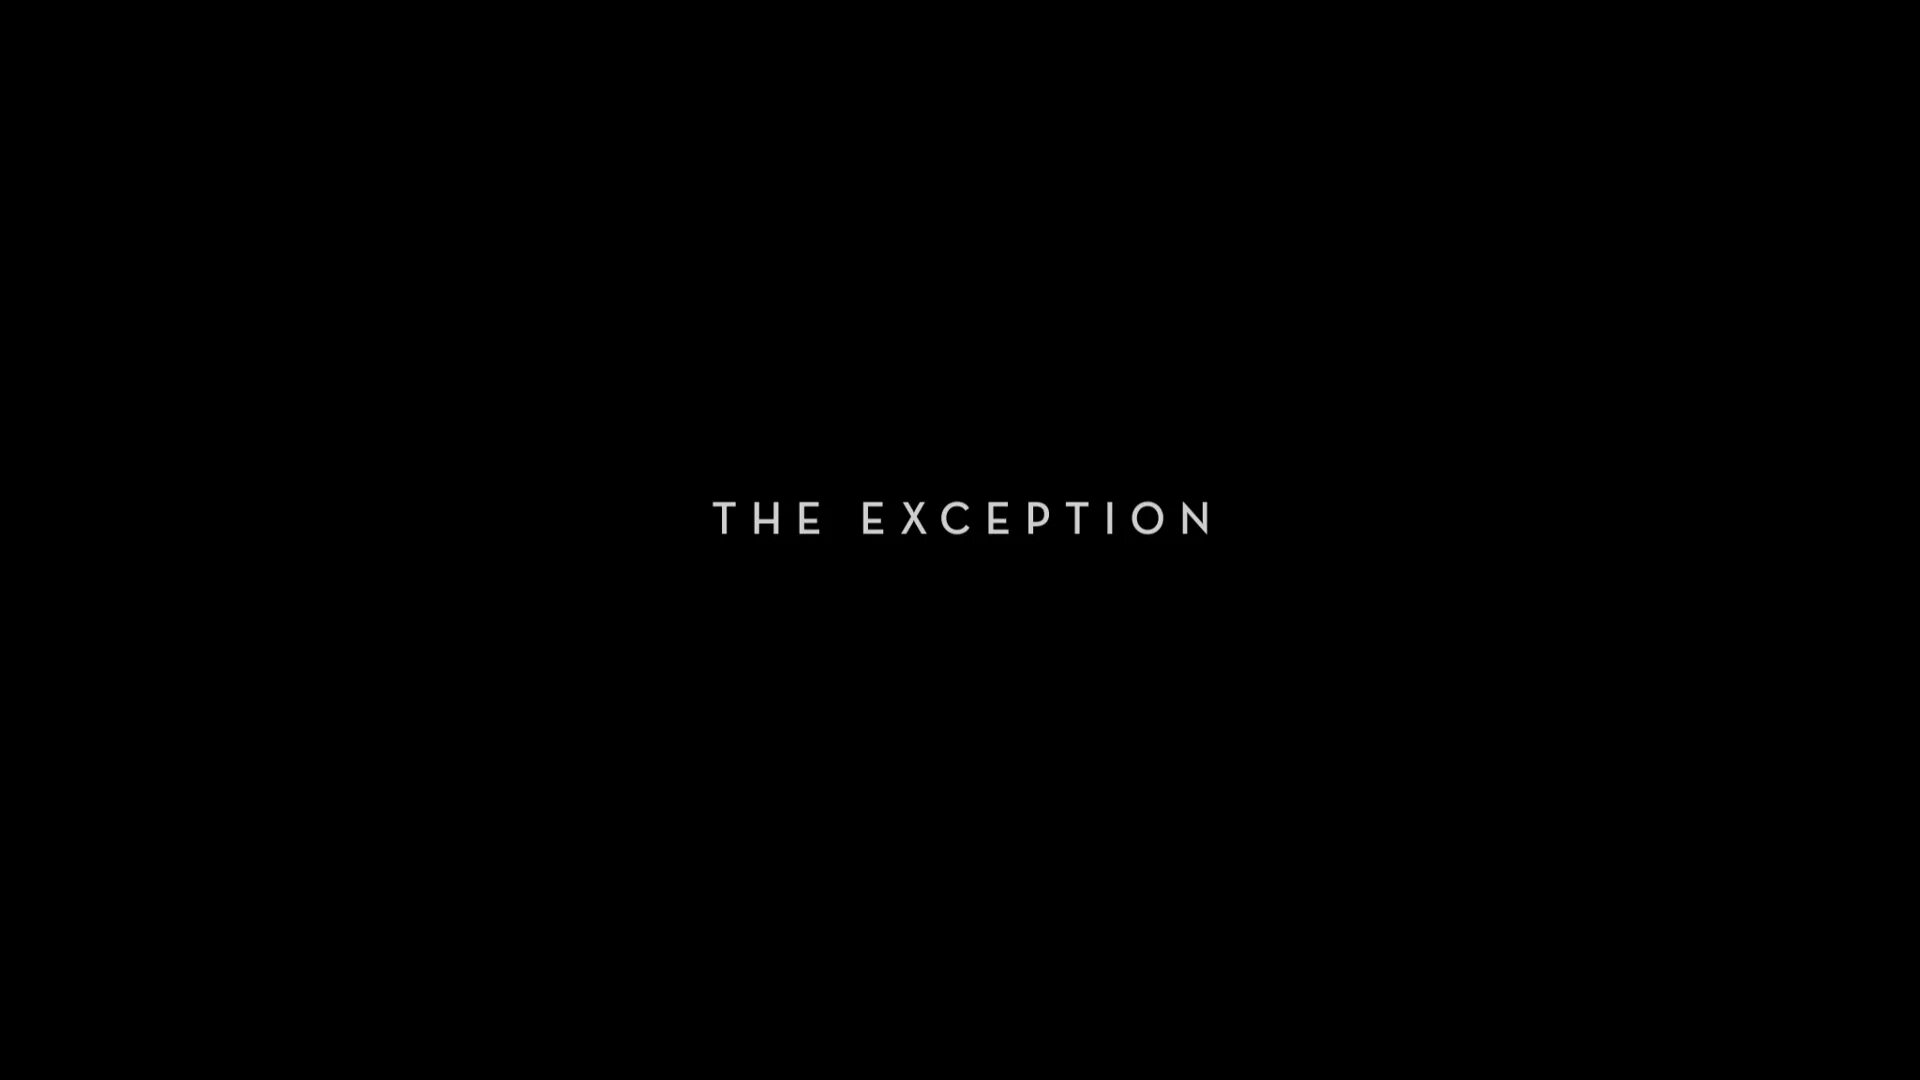 The only exception. The exceptions. The expection Agnes everyone. Exception true